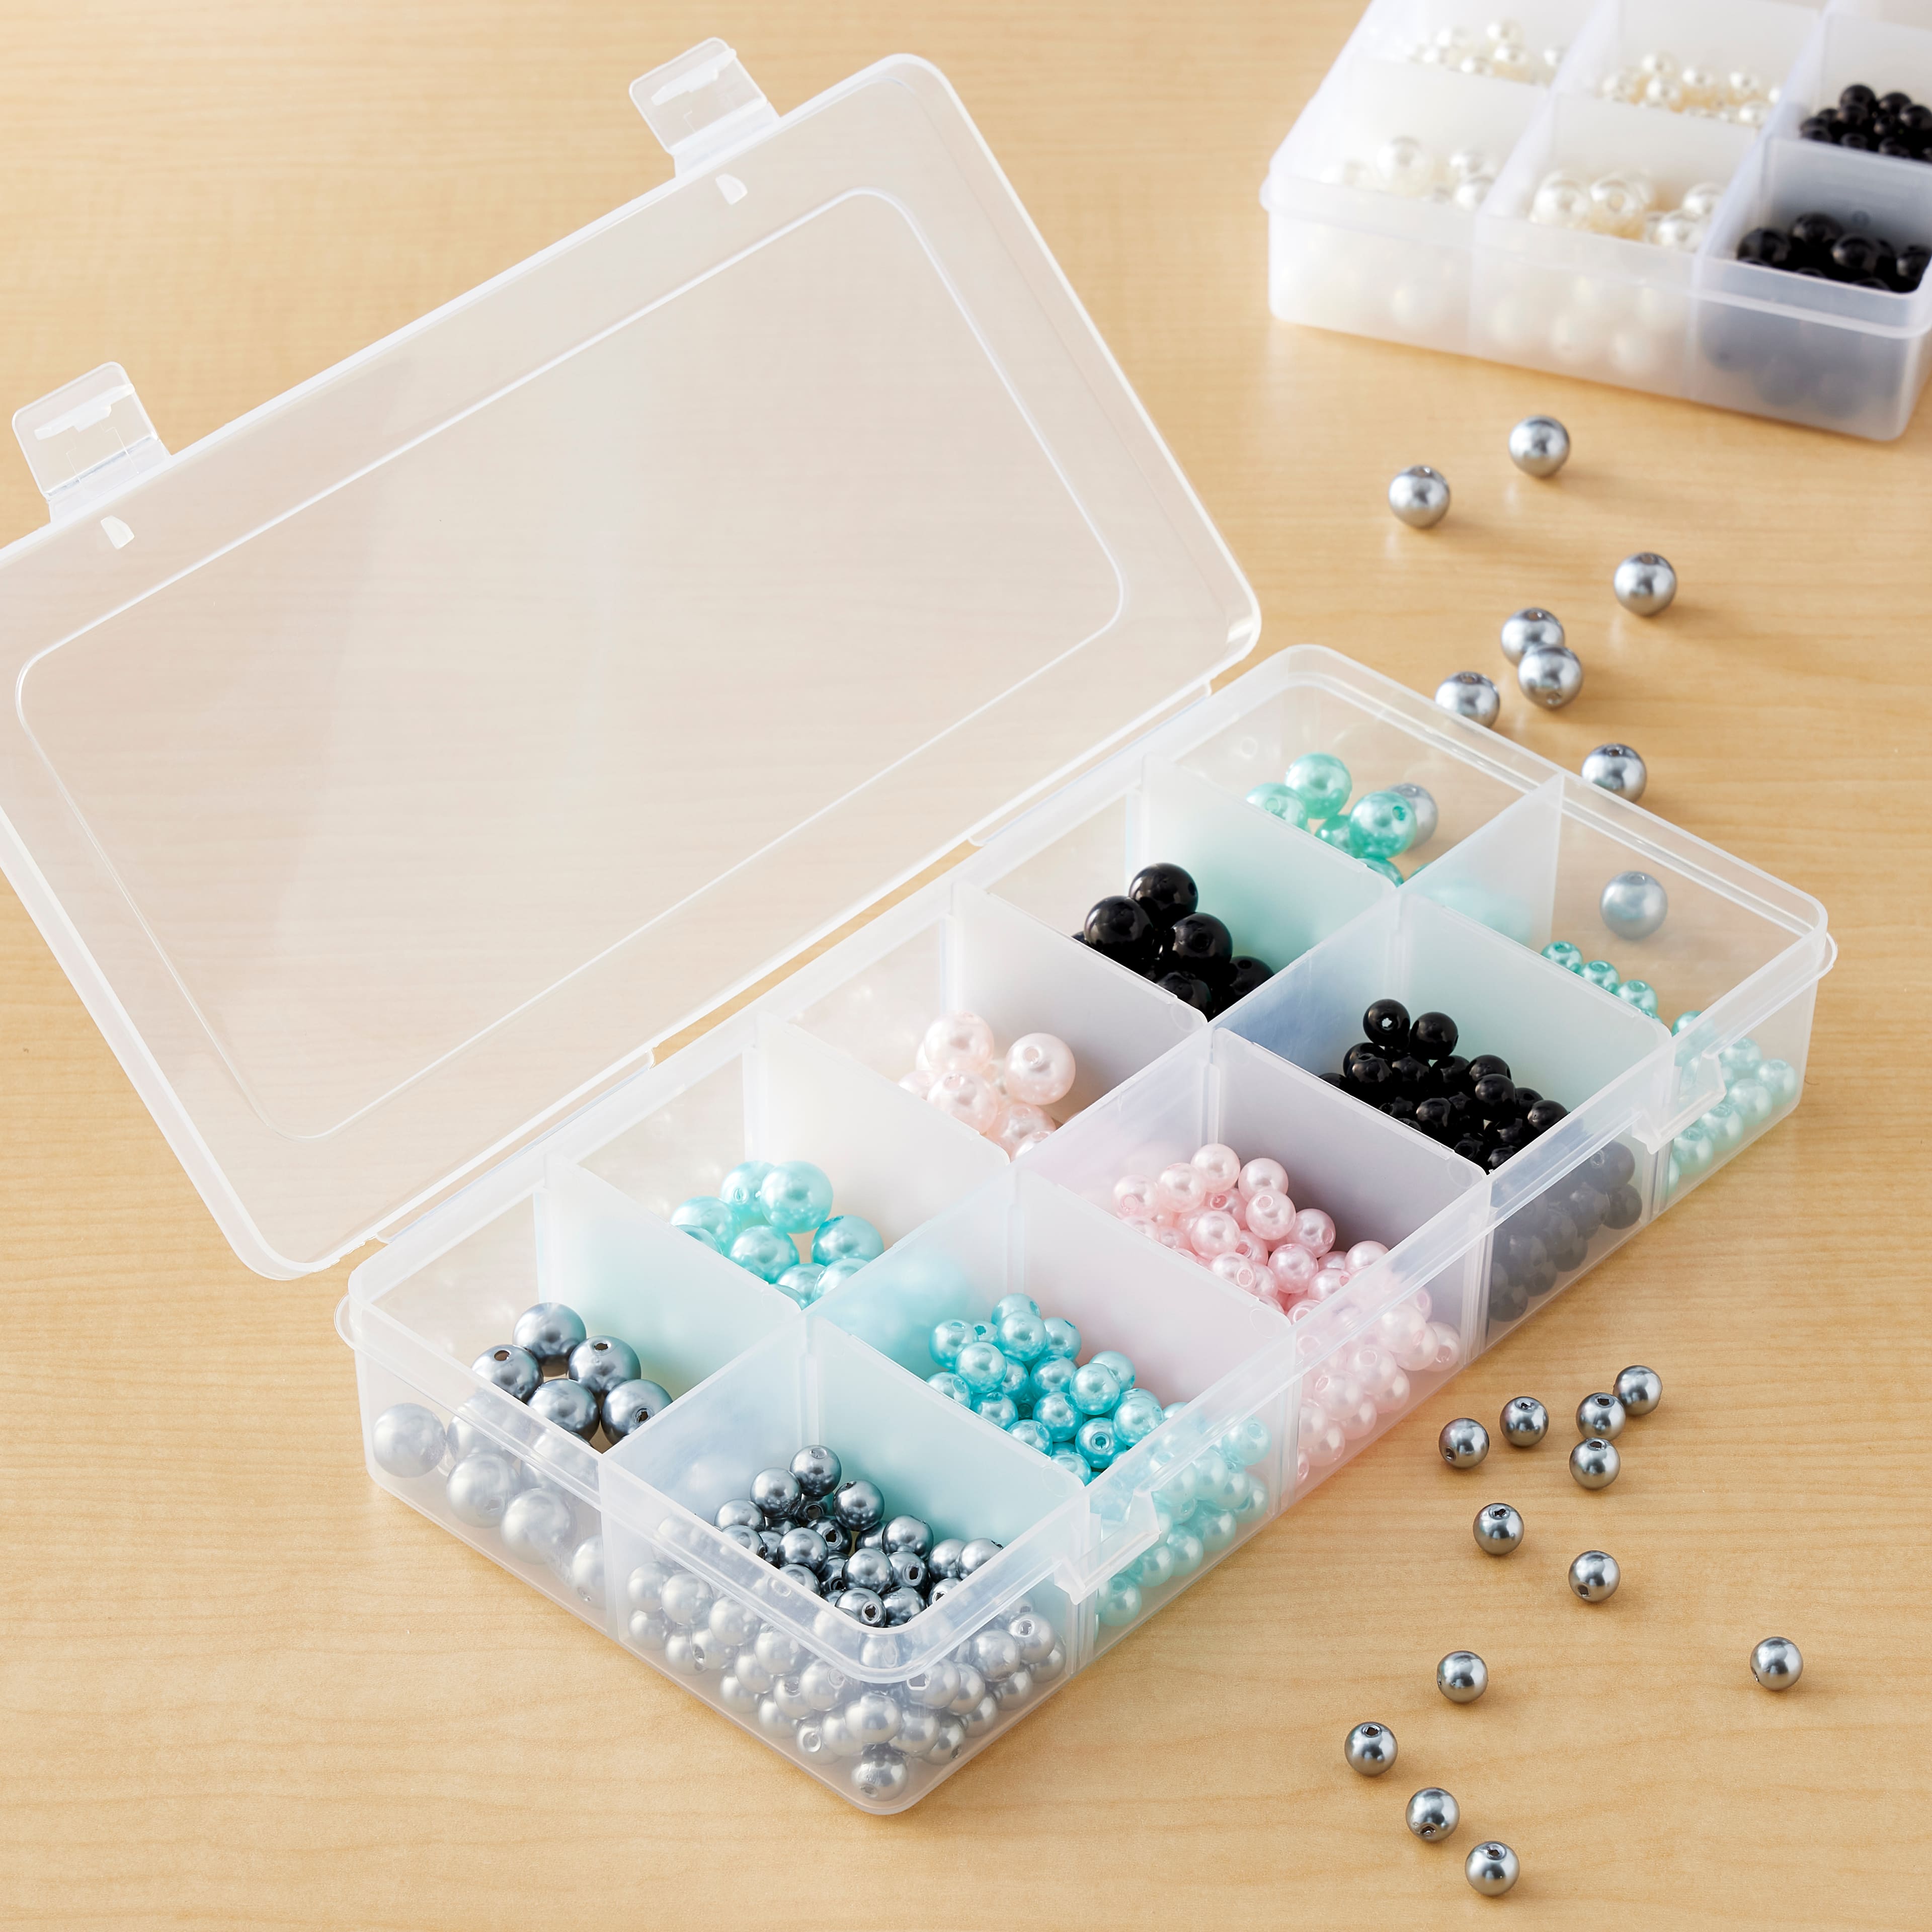 Craft Storage Box, Divided Compartment Storage Container, Craft Box, Bead  Storage, Stacking Bins, -  Israel